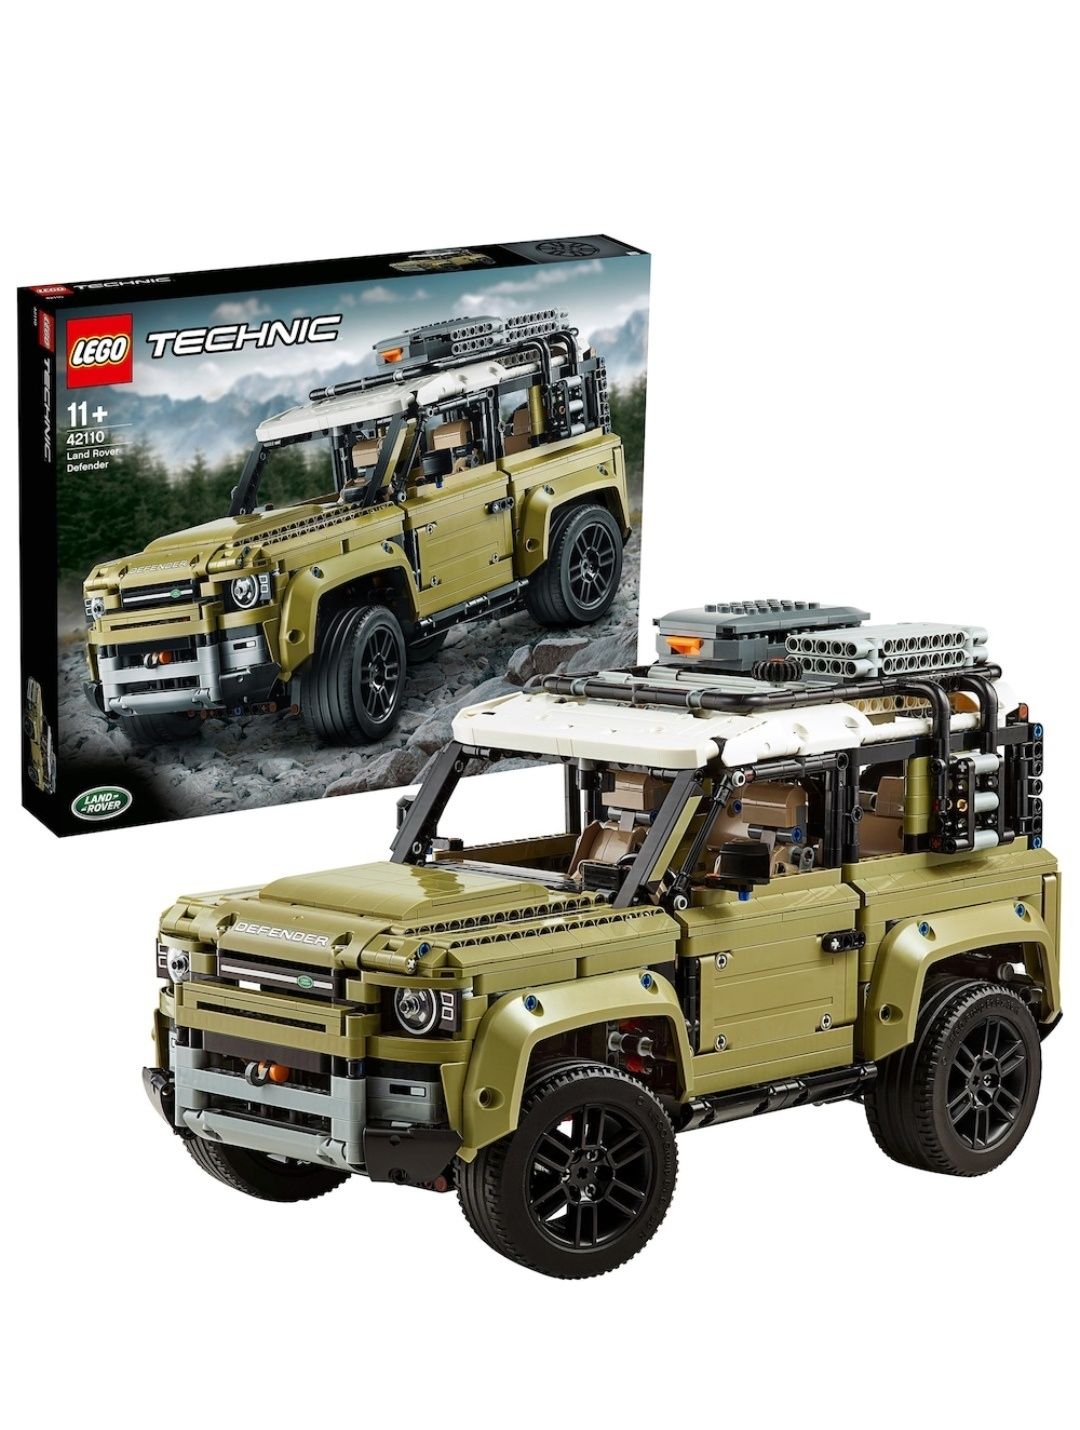 LEGO Technic - Land Rover Defender 42110, 2573 piese